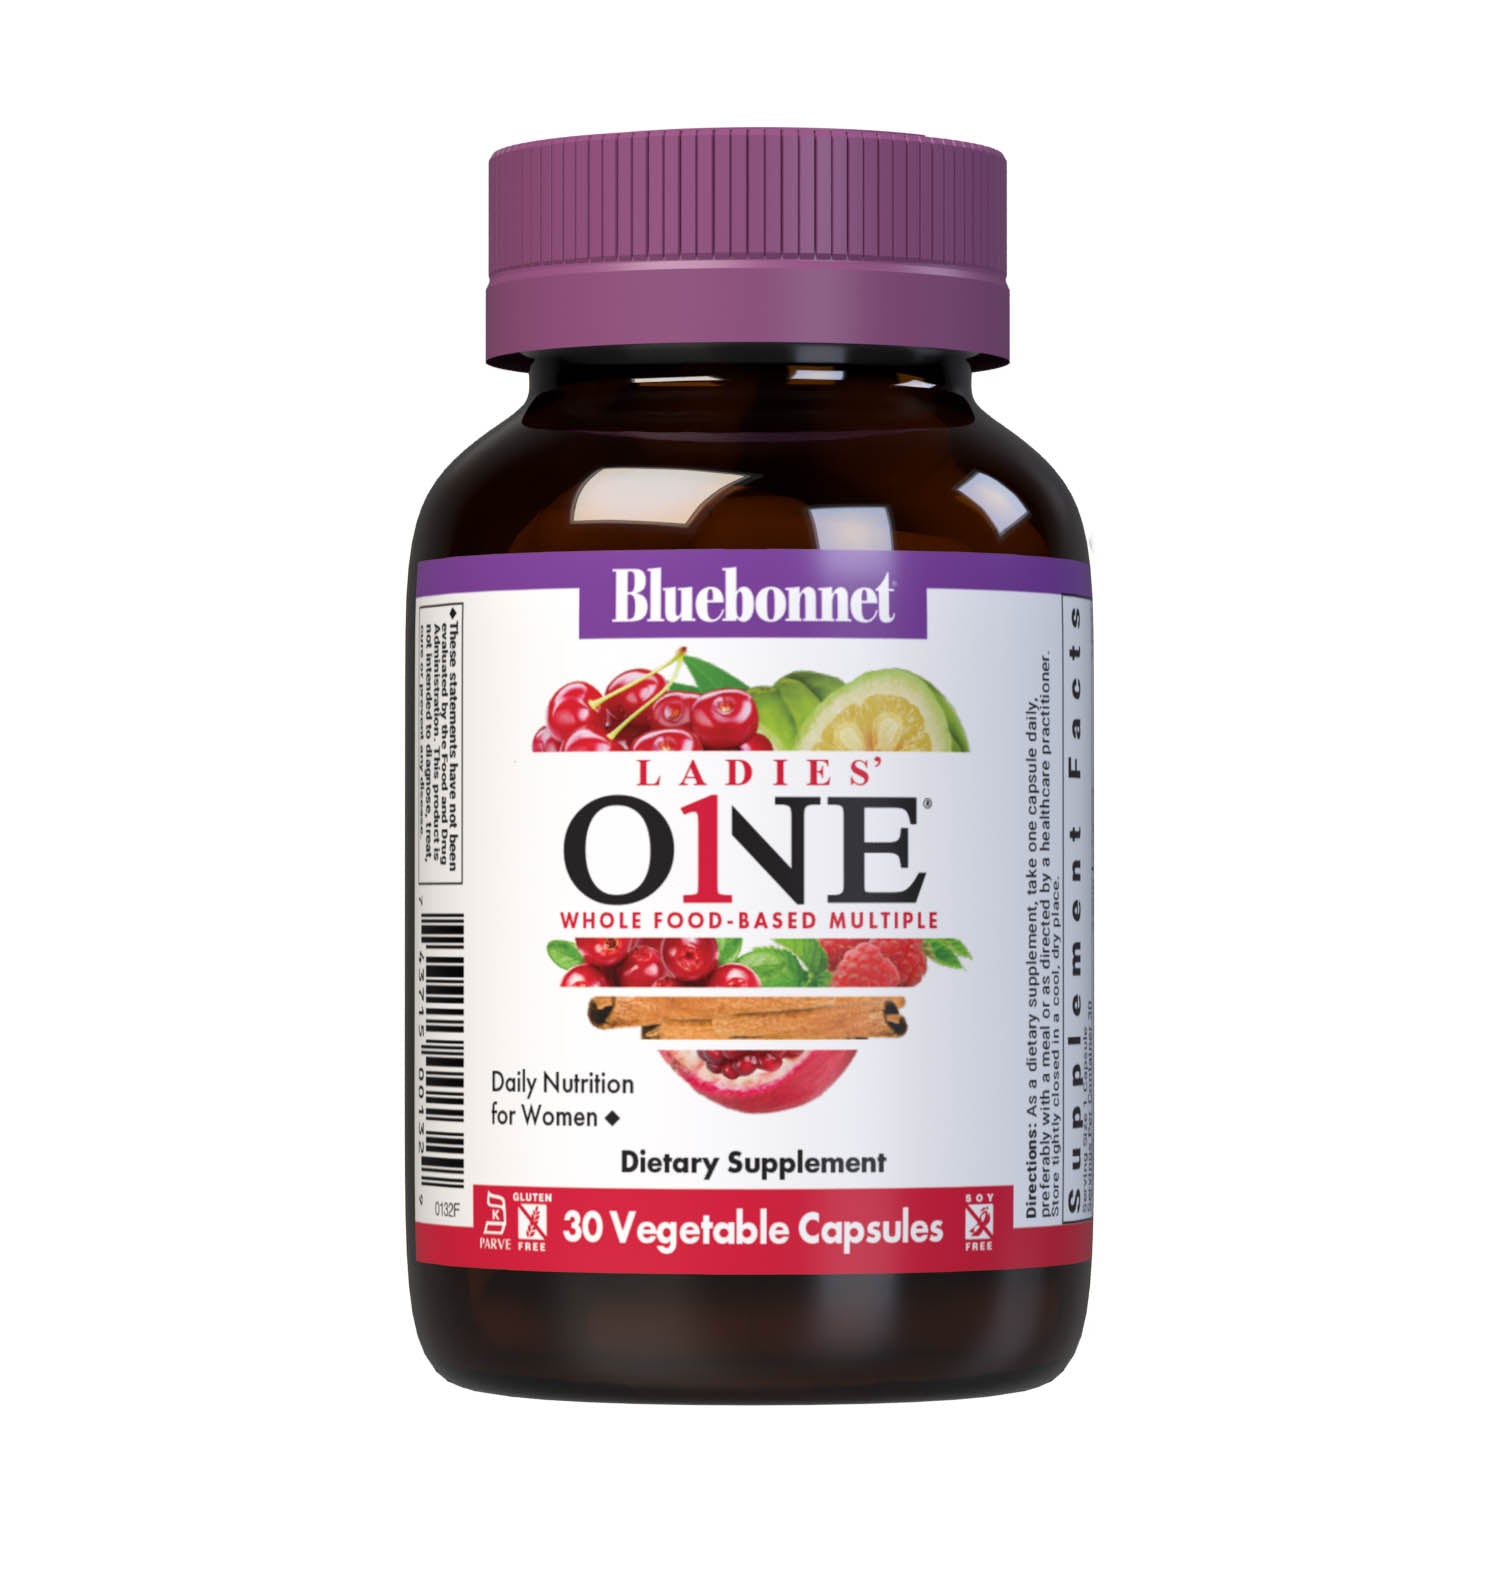 Bluebonnet’s Ladies' One Whole Food-Based Multiple 30 vegetable capsules is formulated with over 25 crucial nutrients like vitamin K2 and vitamin E from sunflower, all the coenzyme forms of the B vitamins, plus Albion chelated minerals in addition to an organic whole food vegetable blend, a plant-sourced enzyme blend, and a unique female health blend for daily nutrition and well being. #size_30 count